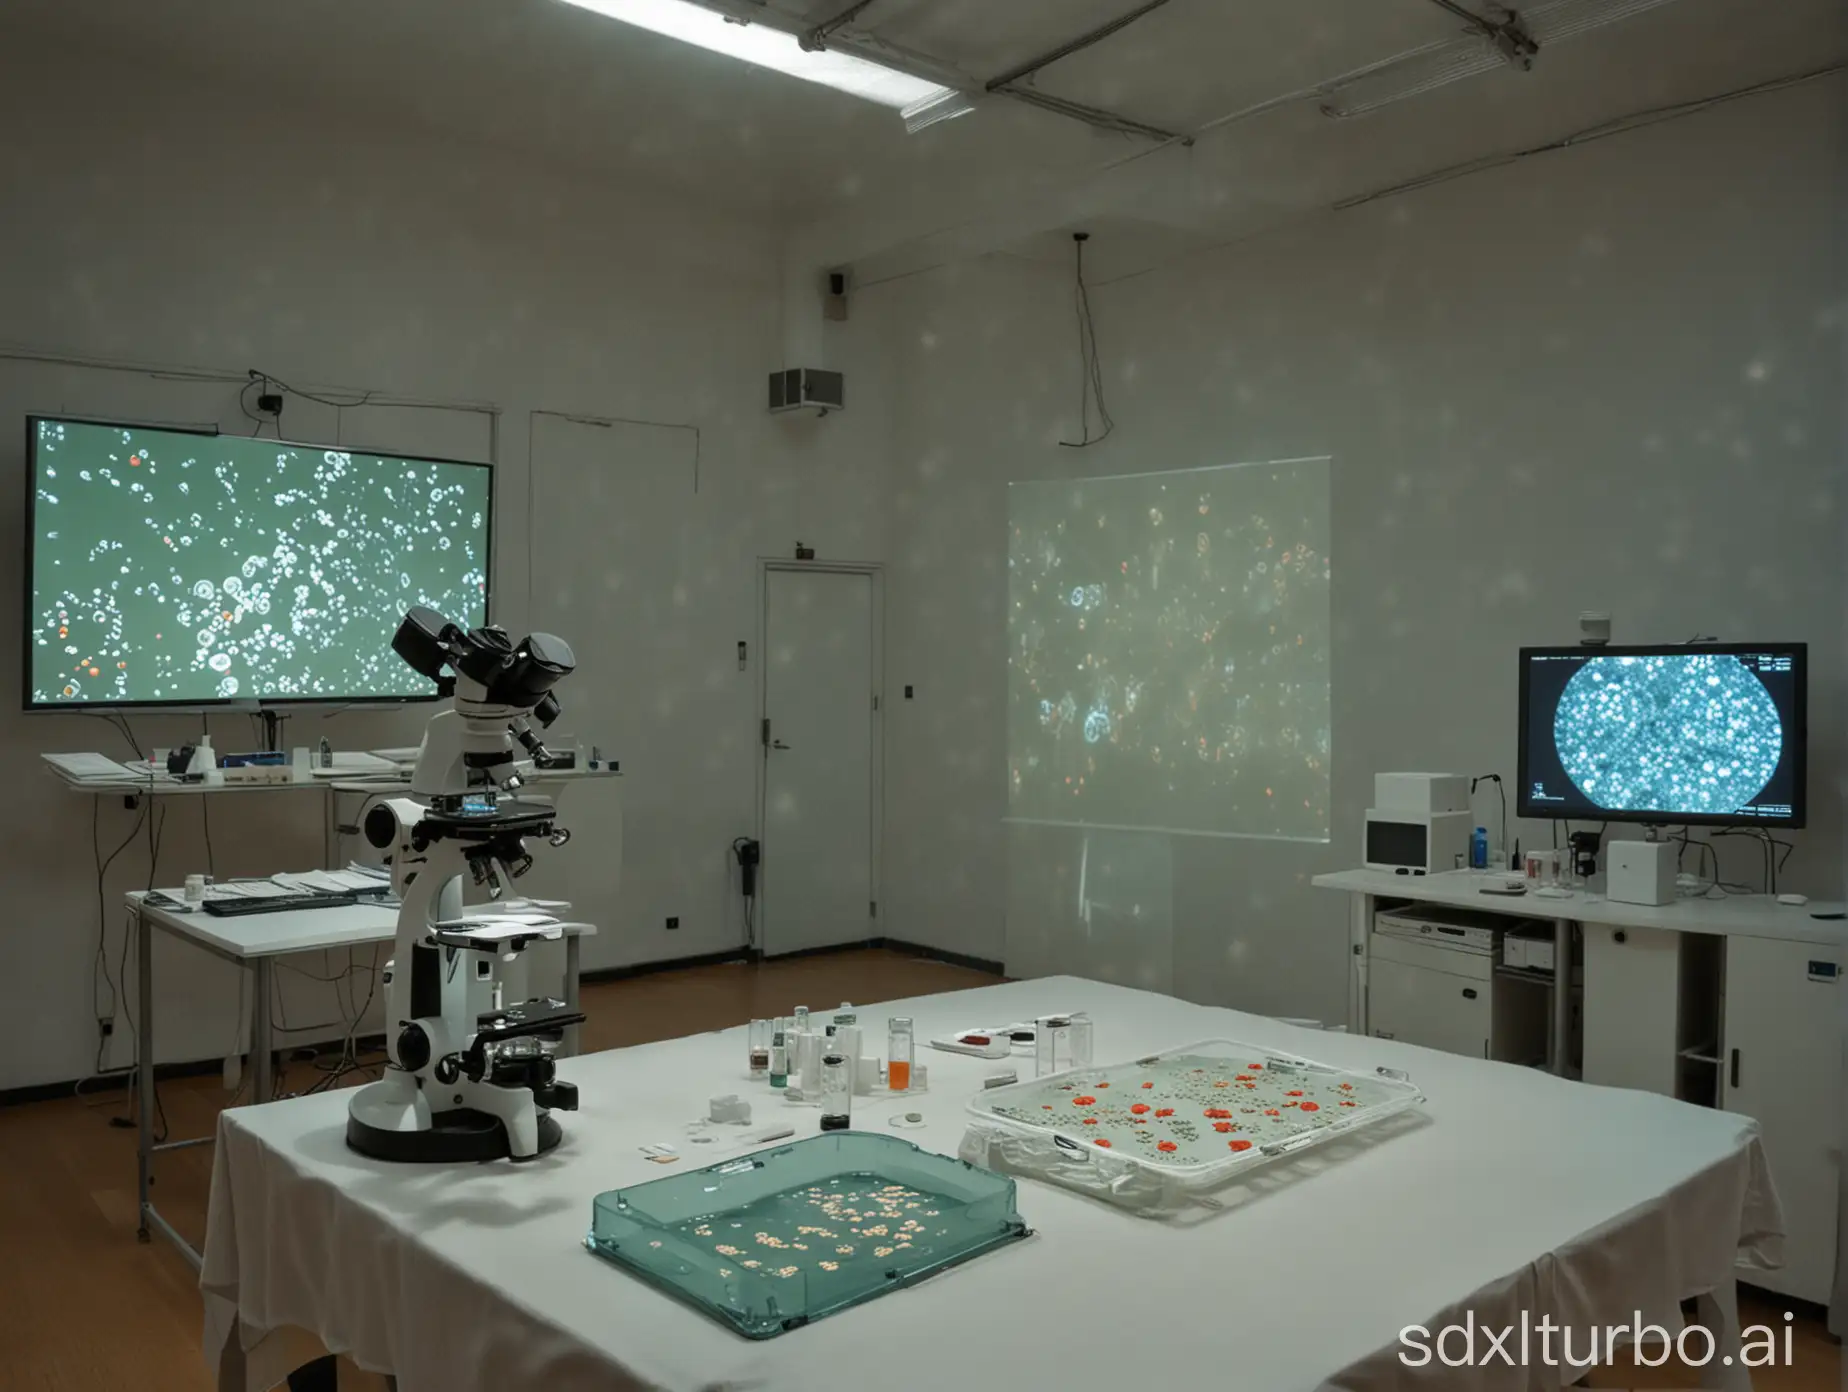 Scientific-Laboratory-Setup-Confocal-Microscope-Observing-Yeast-Culture-with-Live-Projection